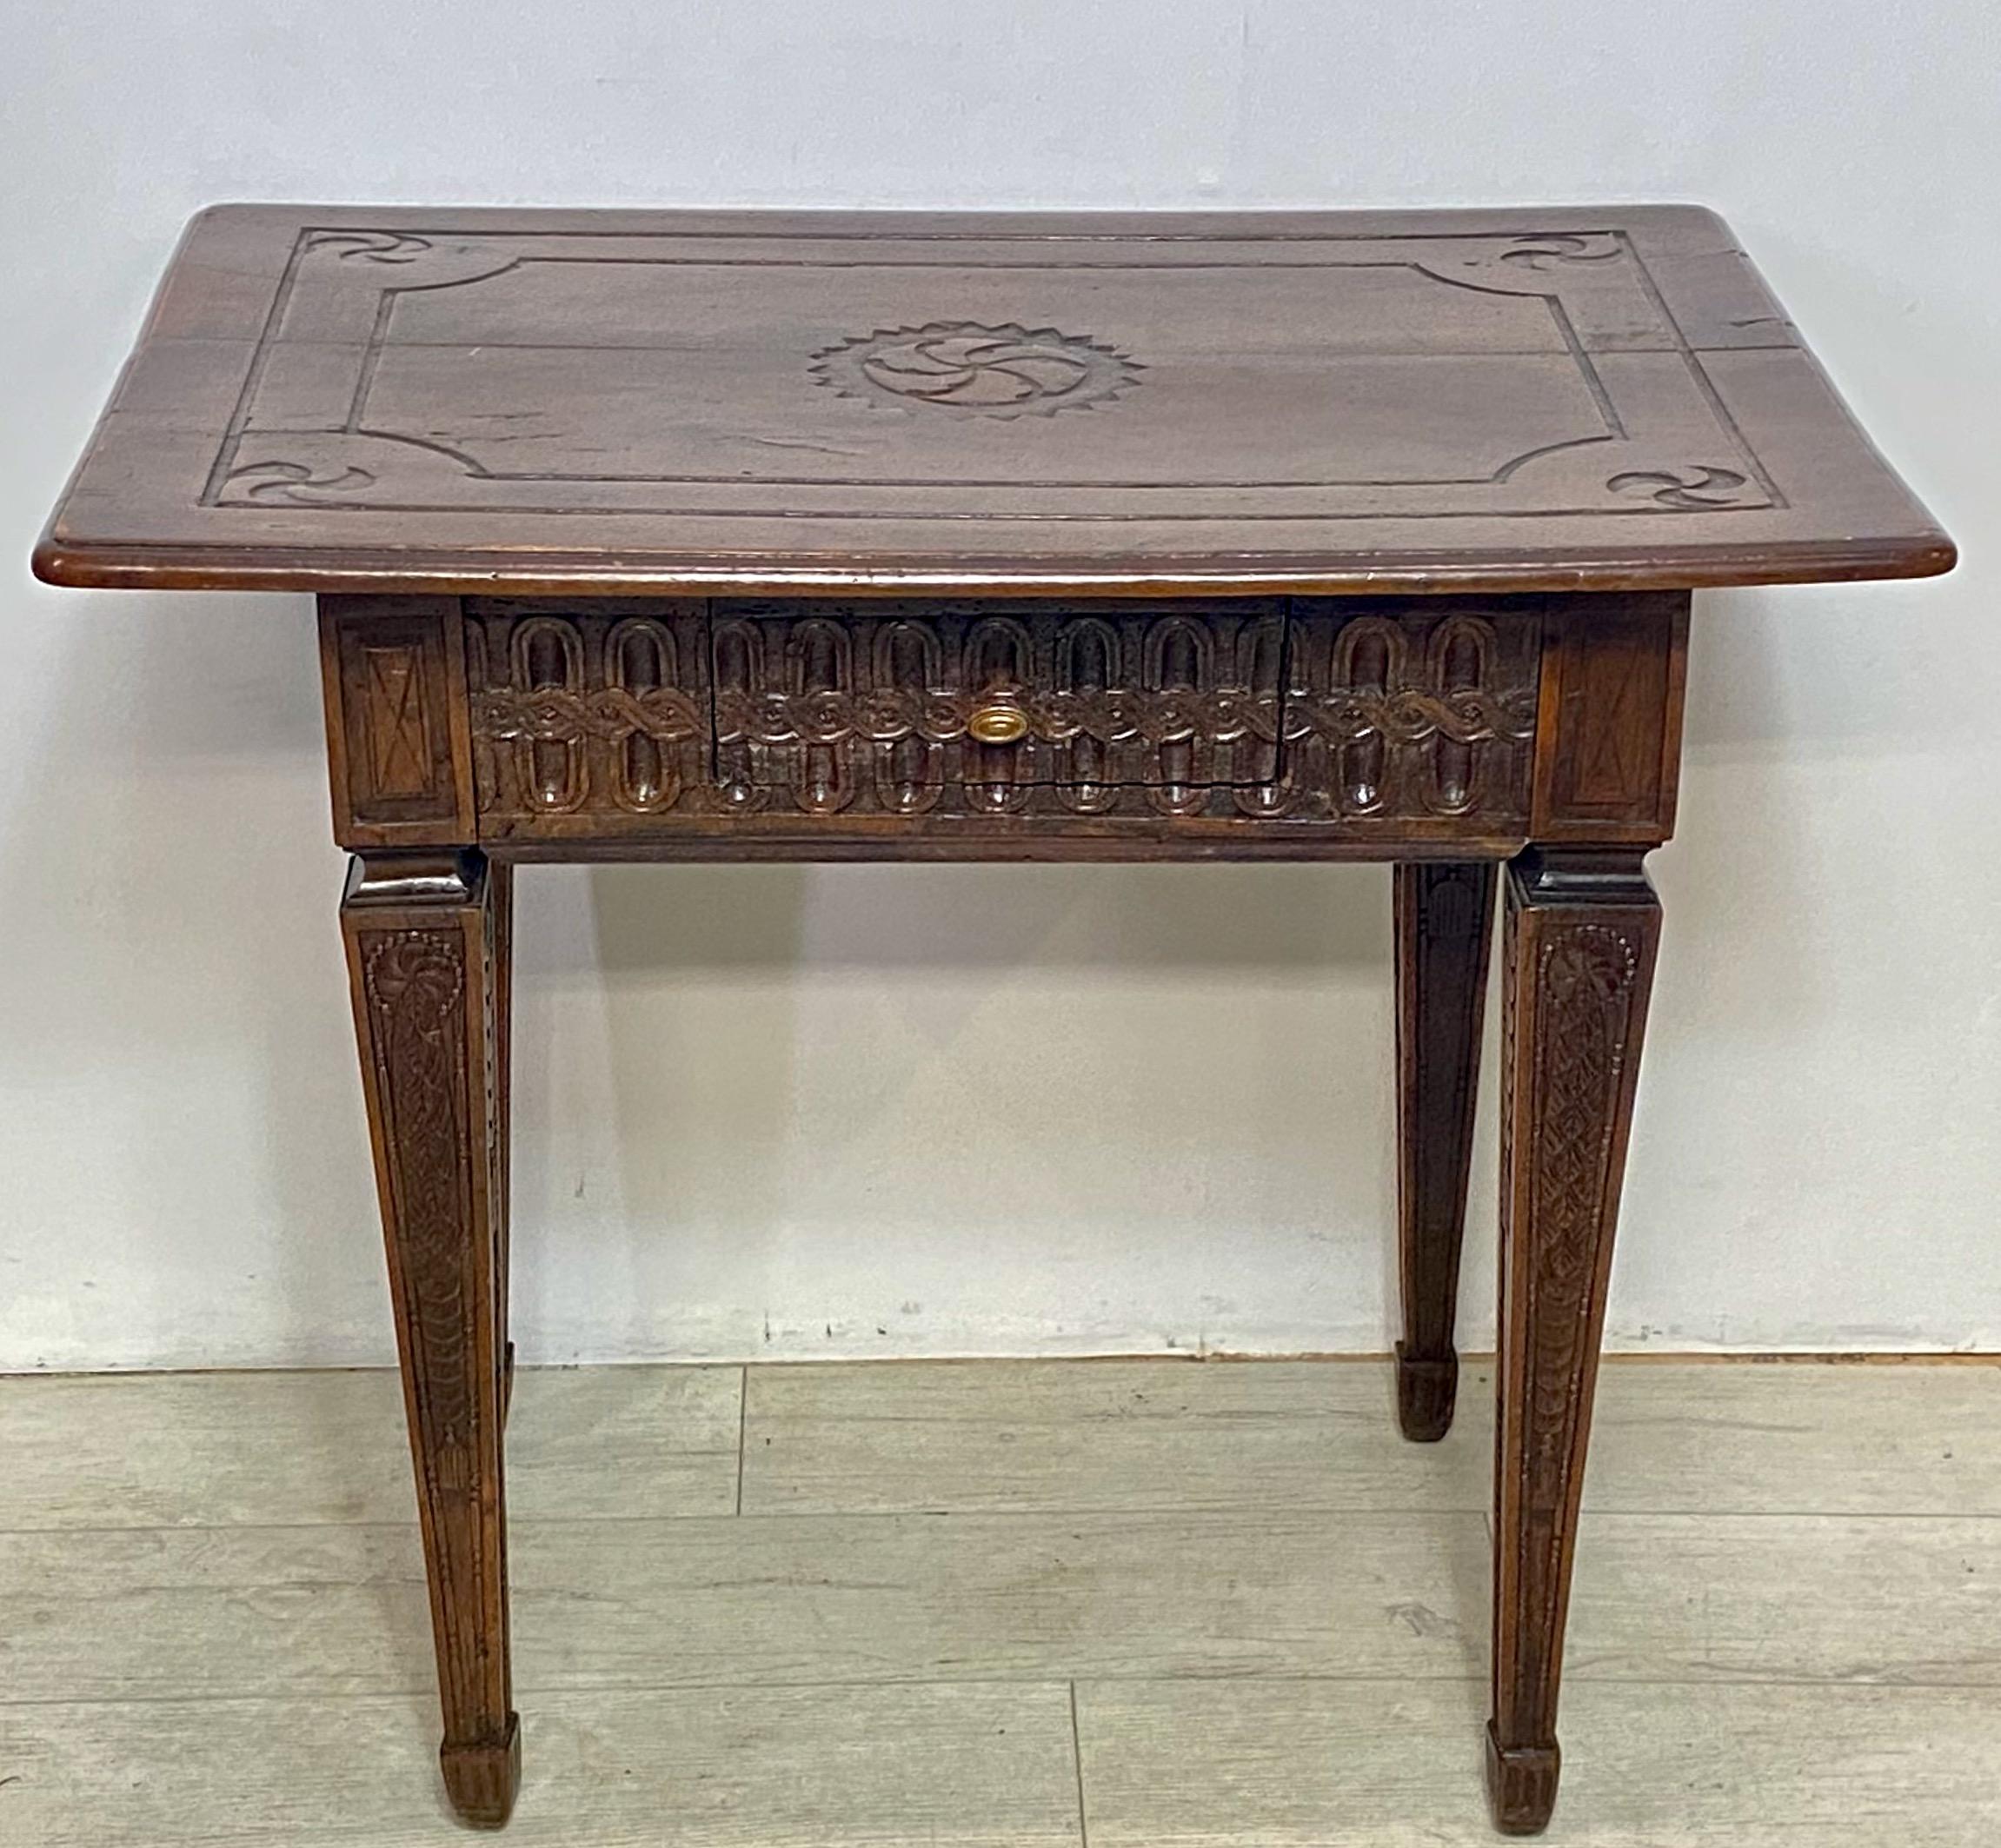 An exceptional early 18th century French Provencial style walnut side table, superbly carved with very old if not original finish.
Extensive and detailed relief carving all the way around including the legs.
In remarkable original condition with